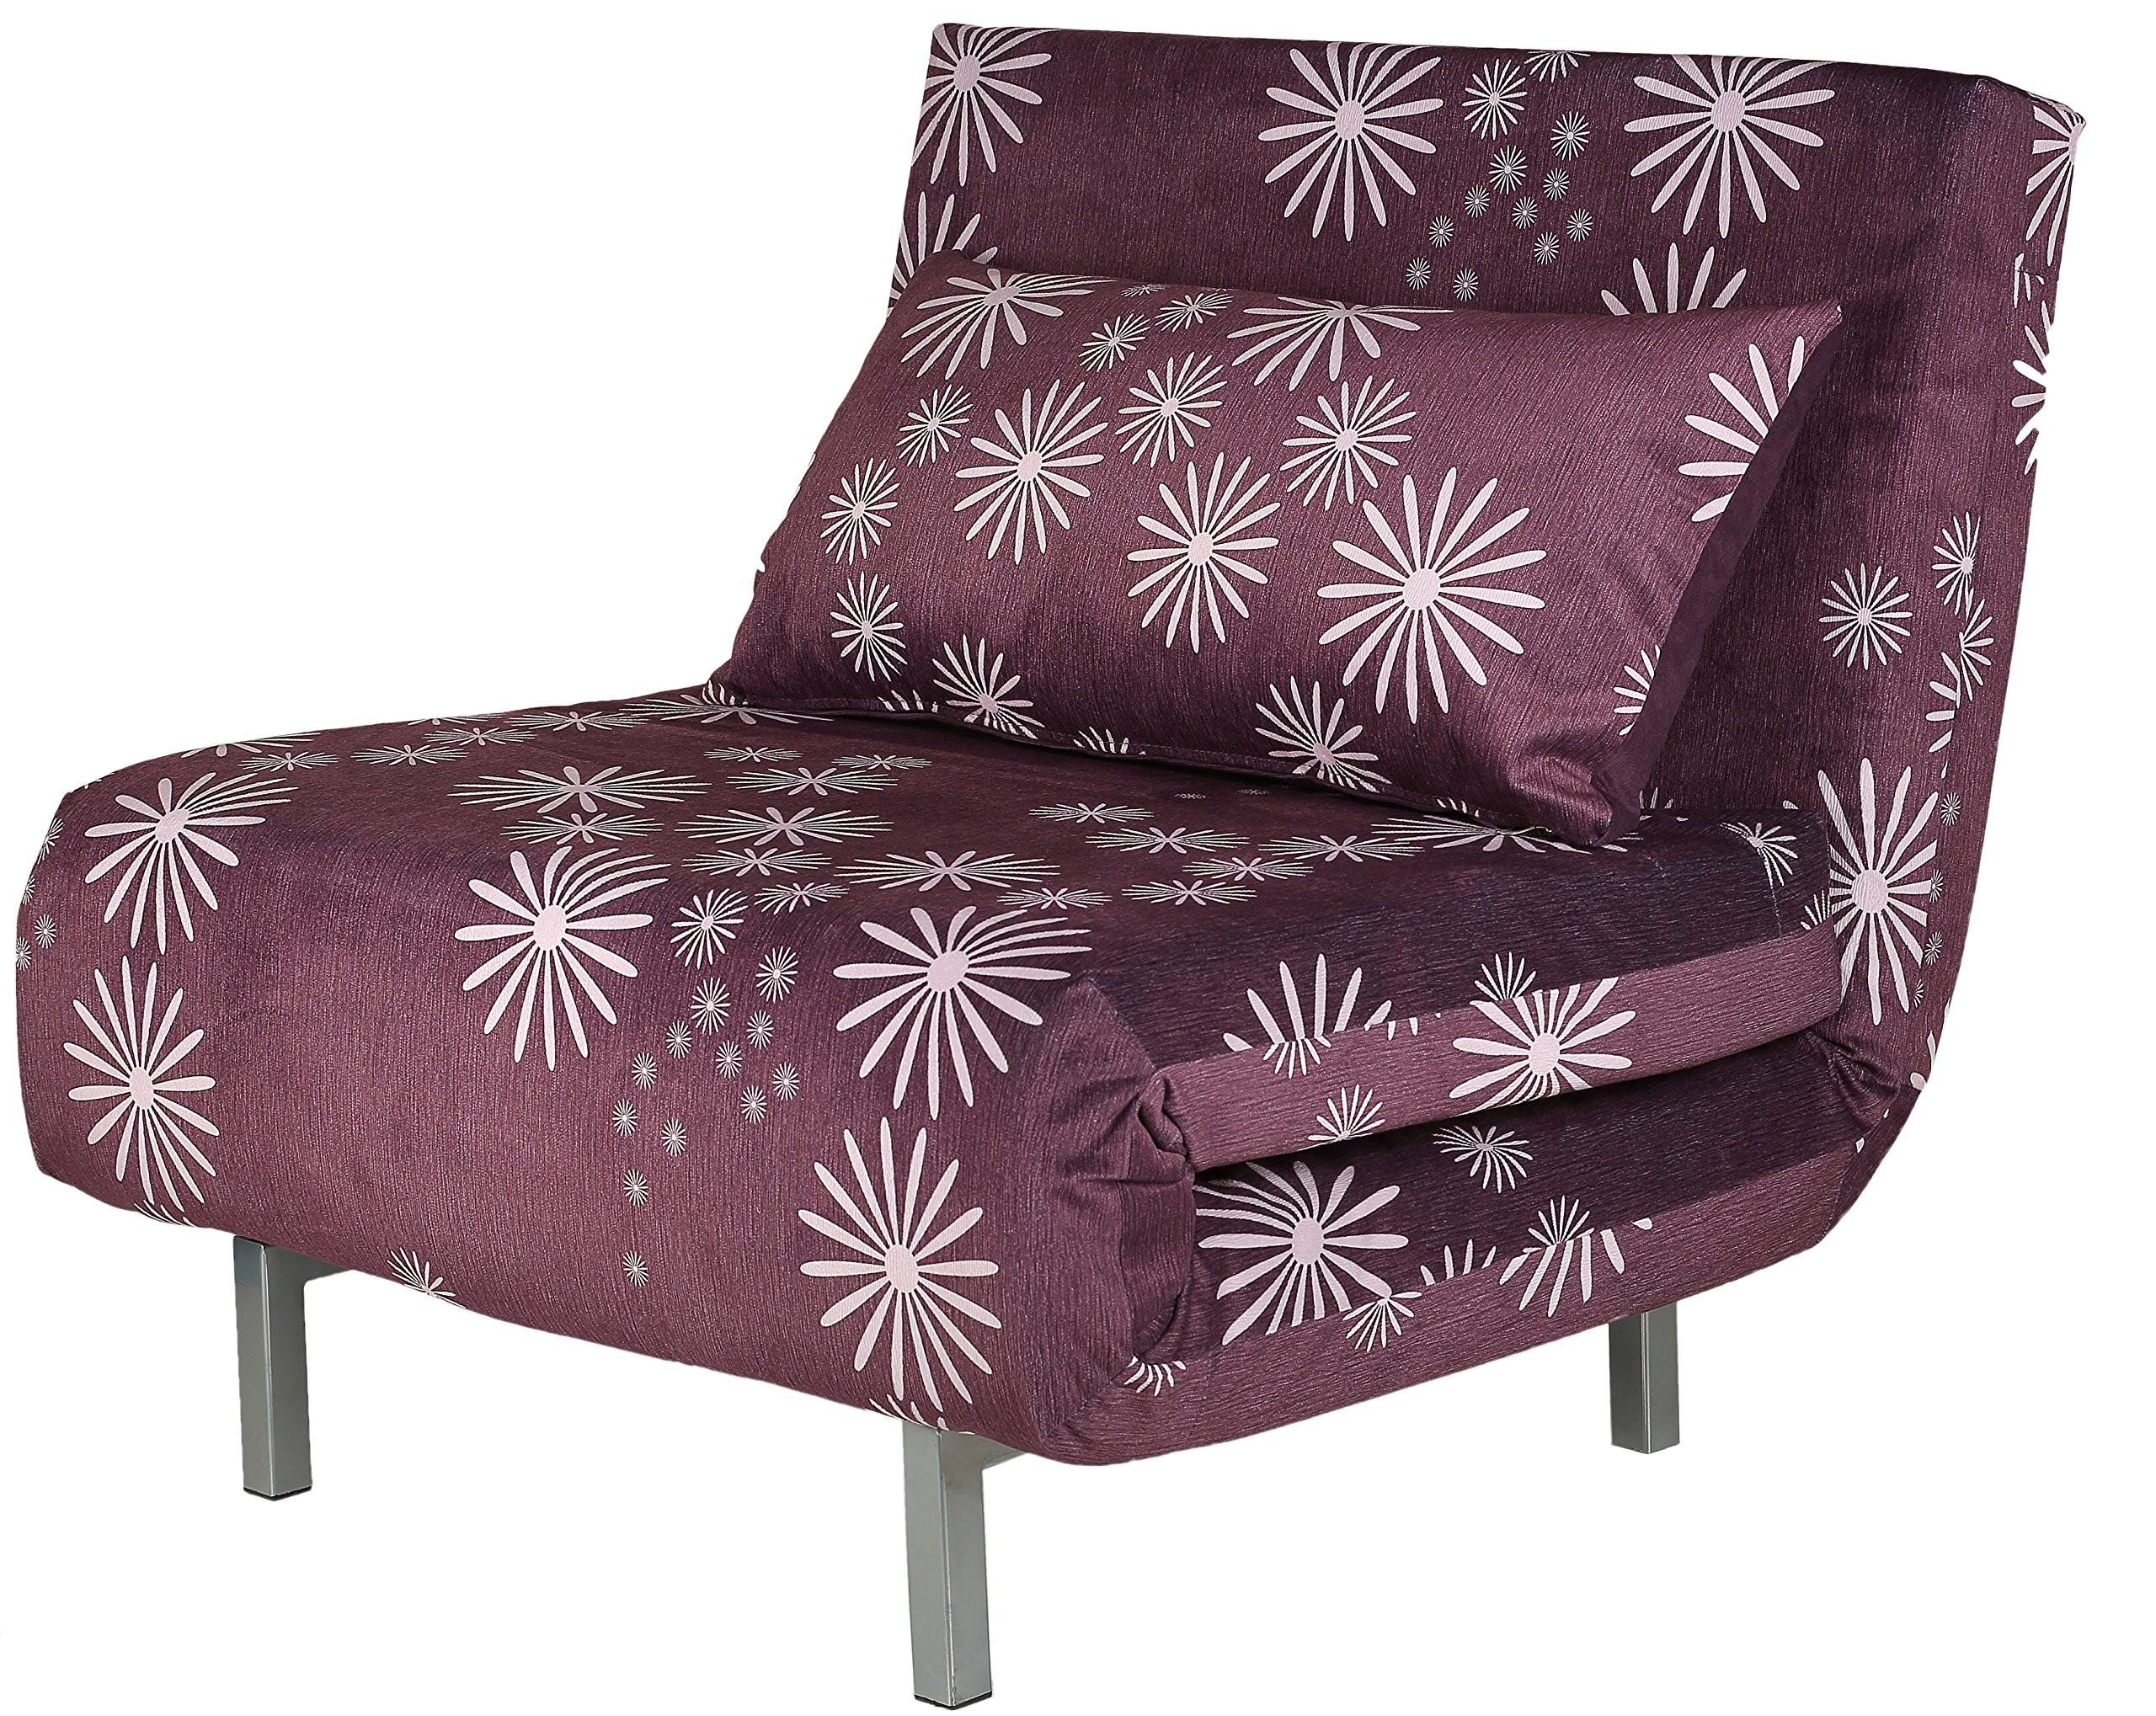 Purple futon sofa bed sleeper couch accent chair indoor